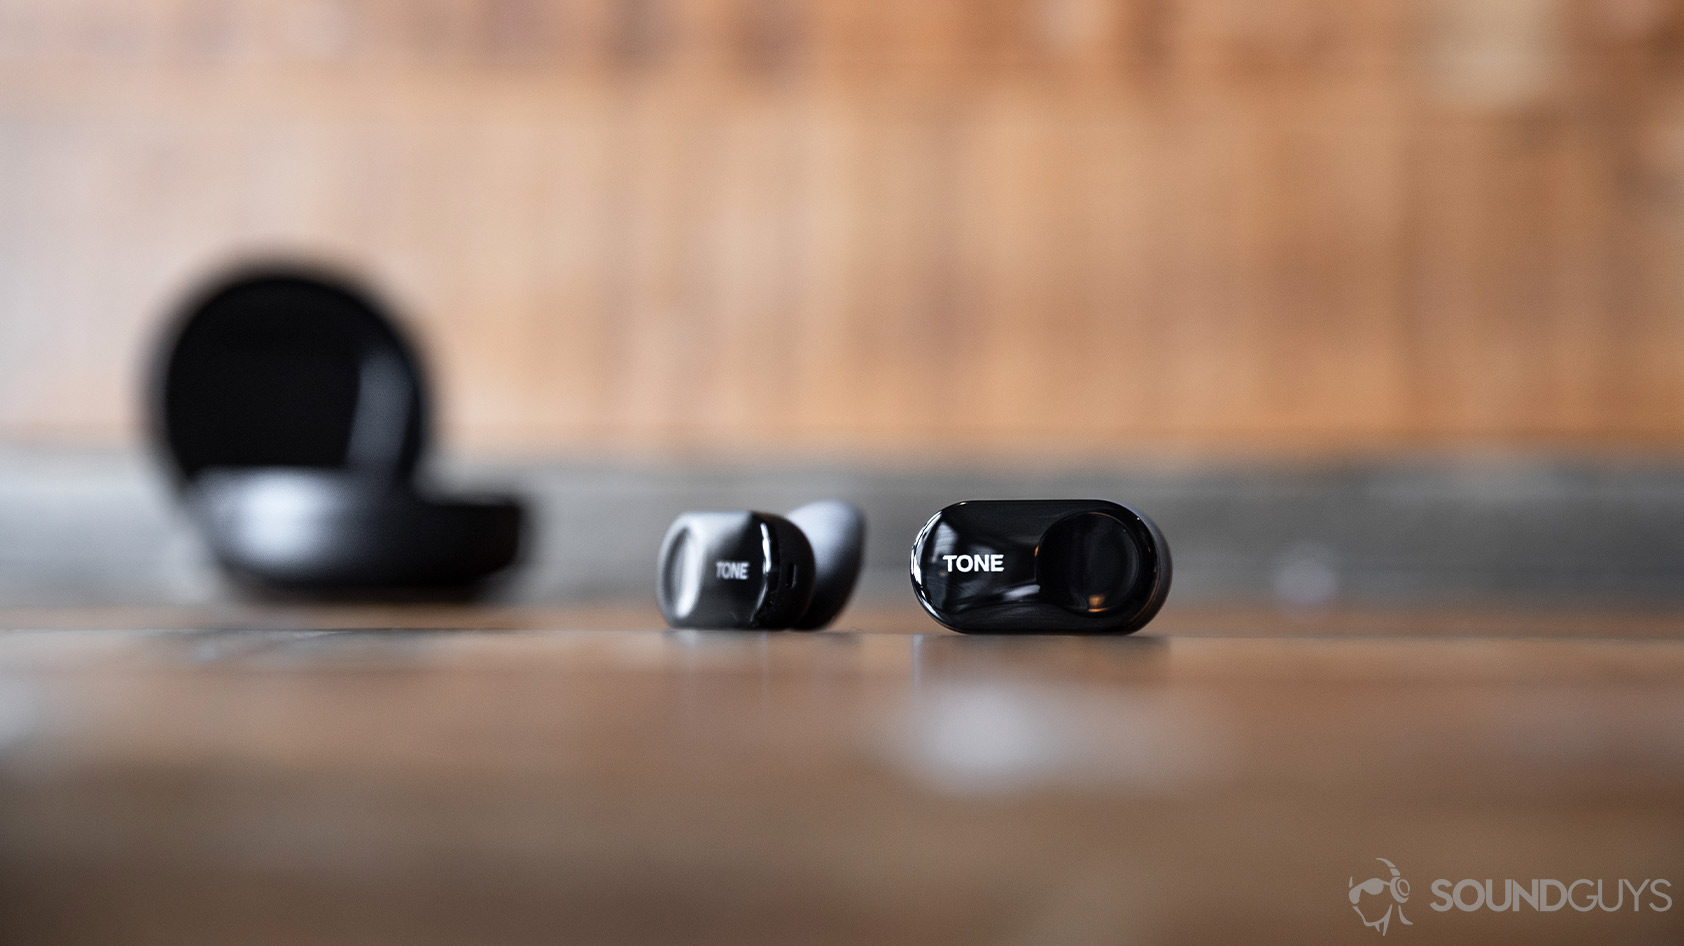 A photo of the LG Tone Free HBS FL7 true wireless earbuds outside of the charging case on a wood surface.